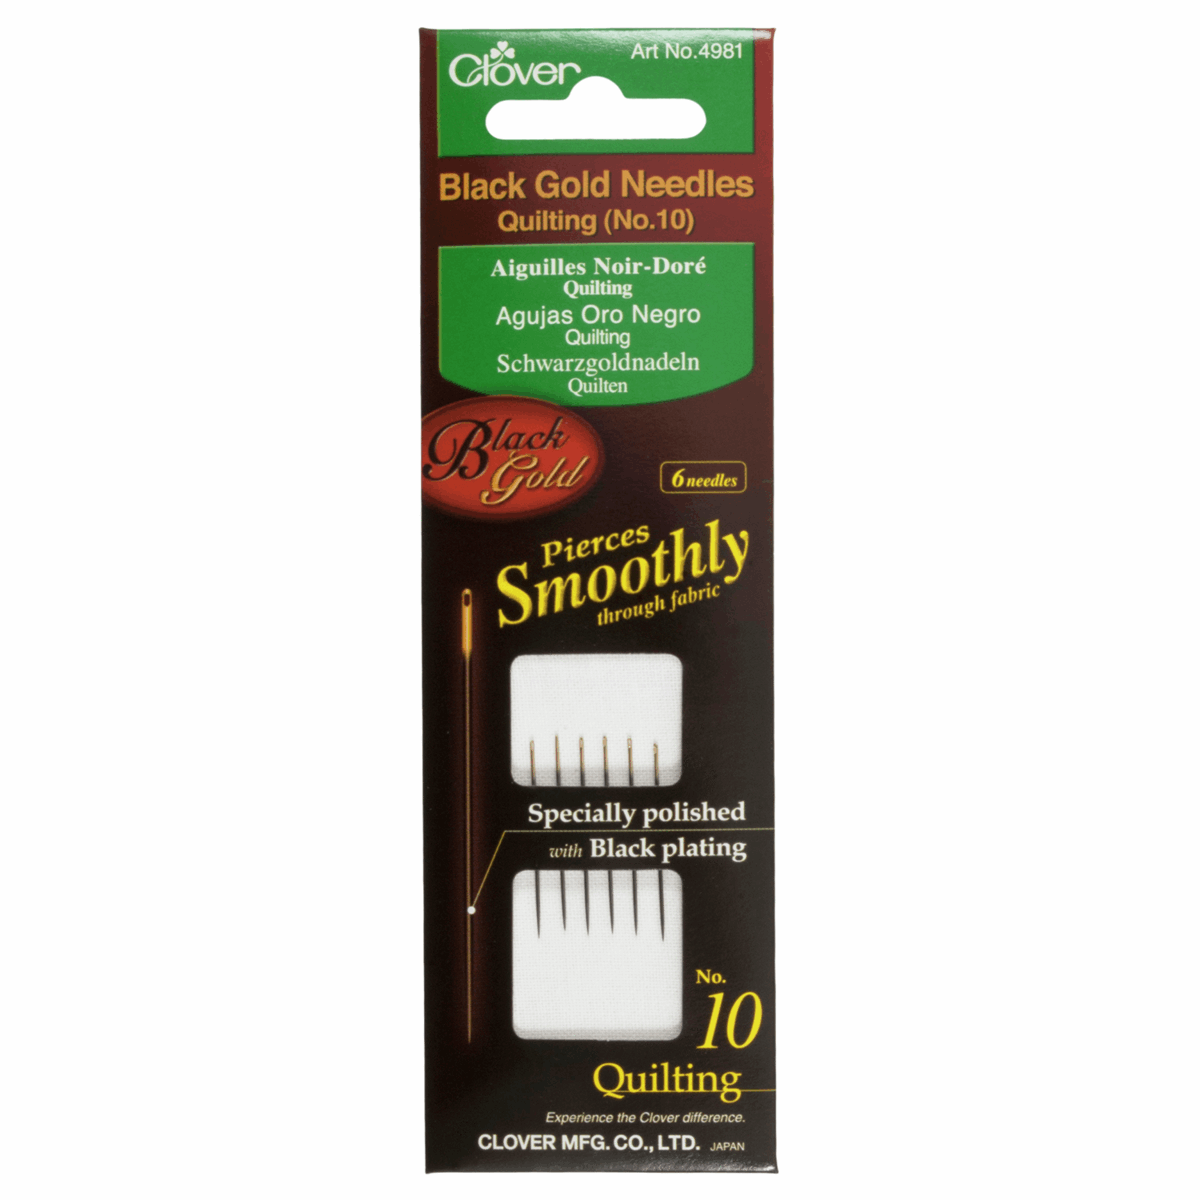 Clover Black/Gold Hand Sewing Quilting Needles - Size No. 10 (Pack of 6)